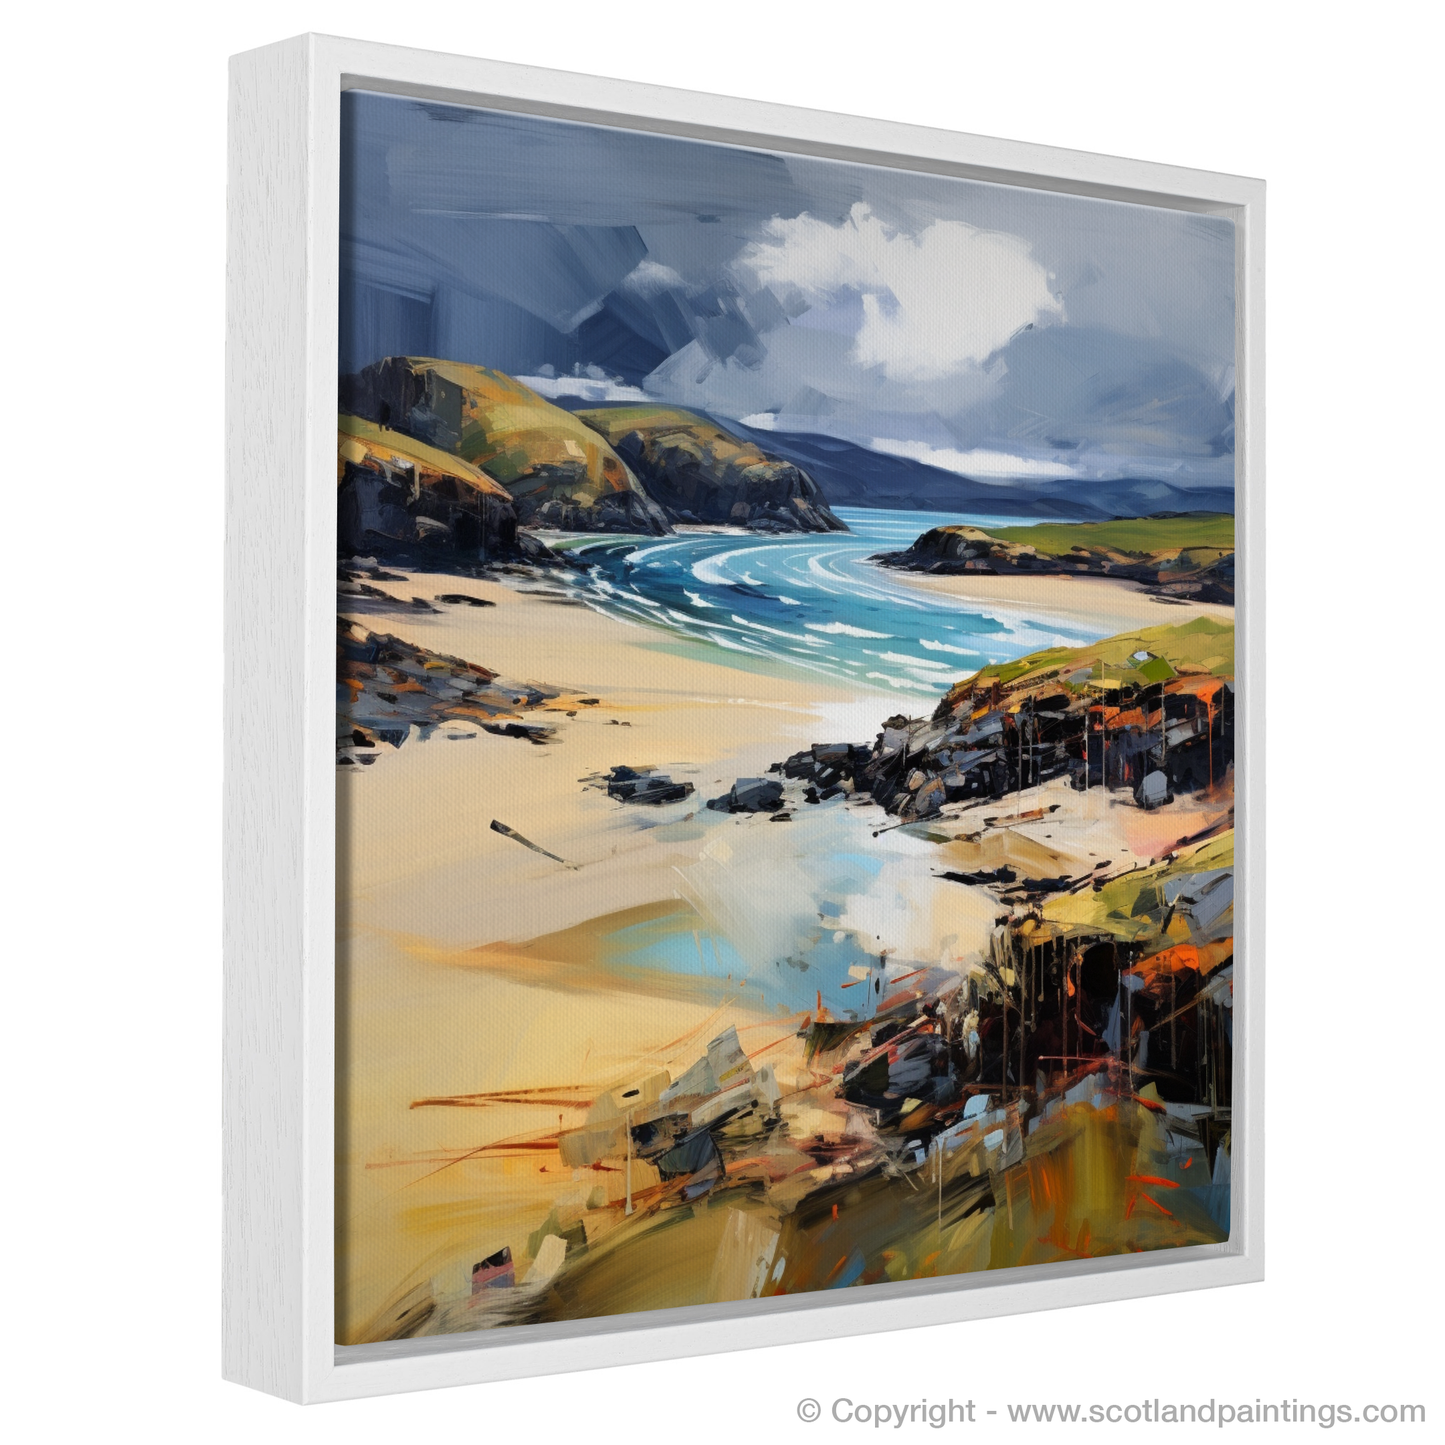 Painting and Art Print of Balnakeil Bay, Durness, Sutherland entitled "Wild Embrace of Balnakeil Bay".